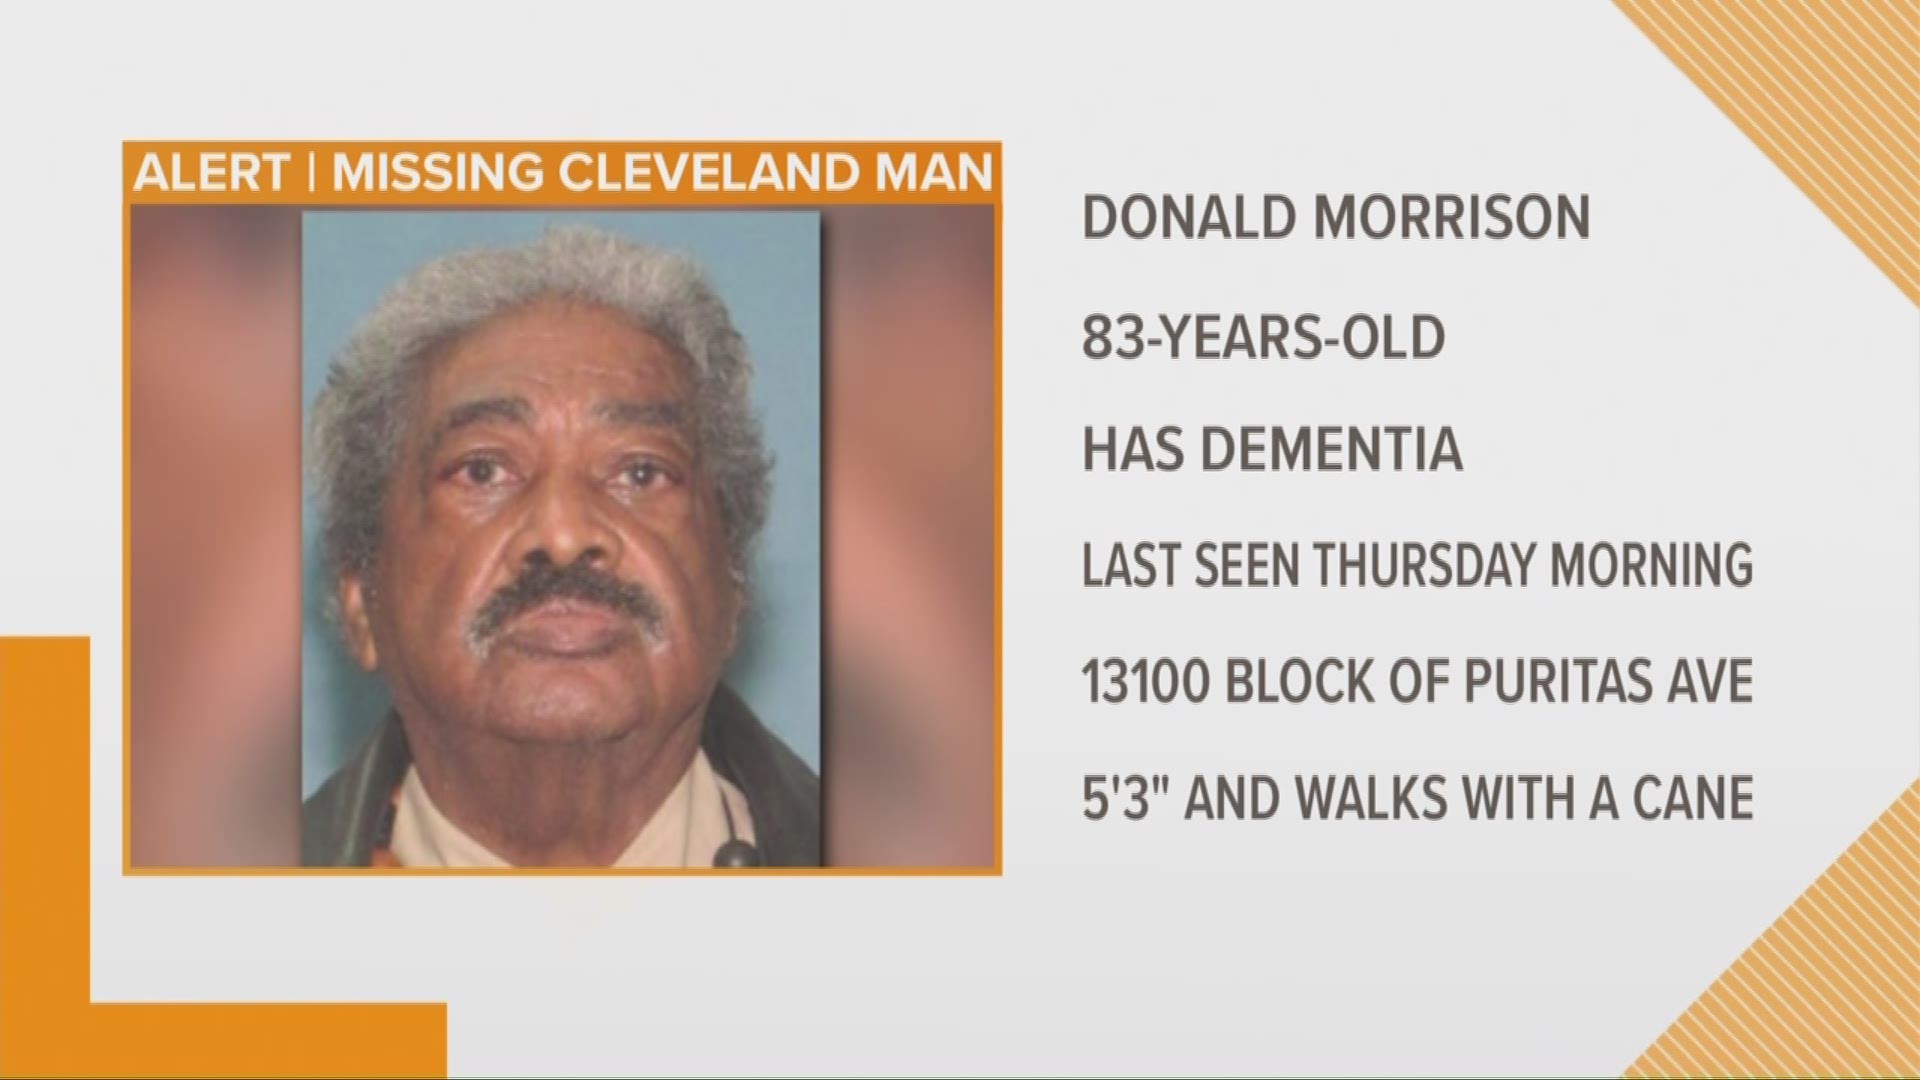 June 15, 2018: Cleveland police say Donald Morrison was last seen by his family around 8:30 a.m. Thursday in the 13100 block of Puritas Avenue. When his son returned home later Thursday evening, Morrison was gone.